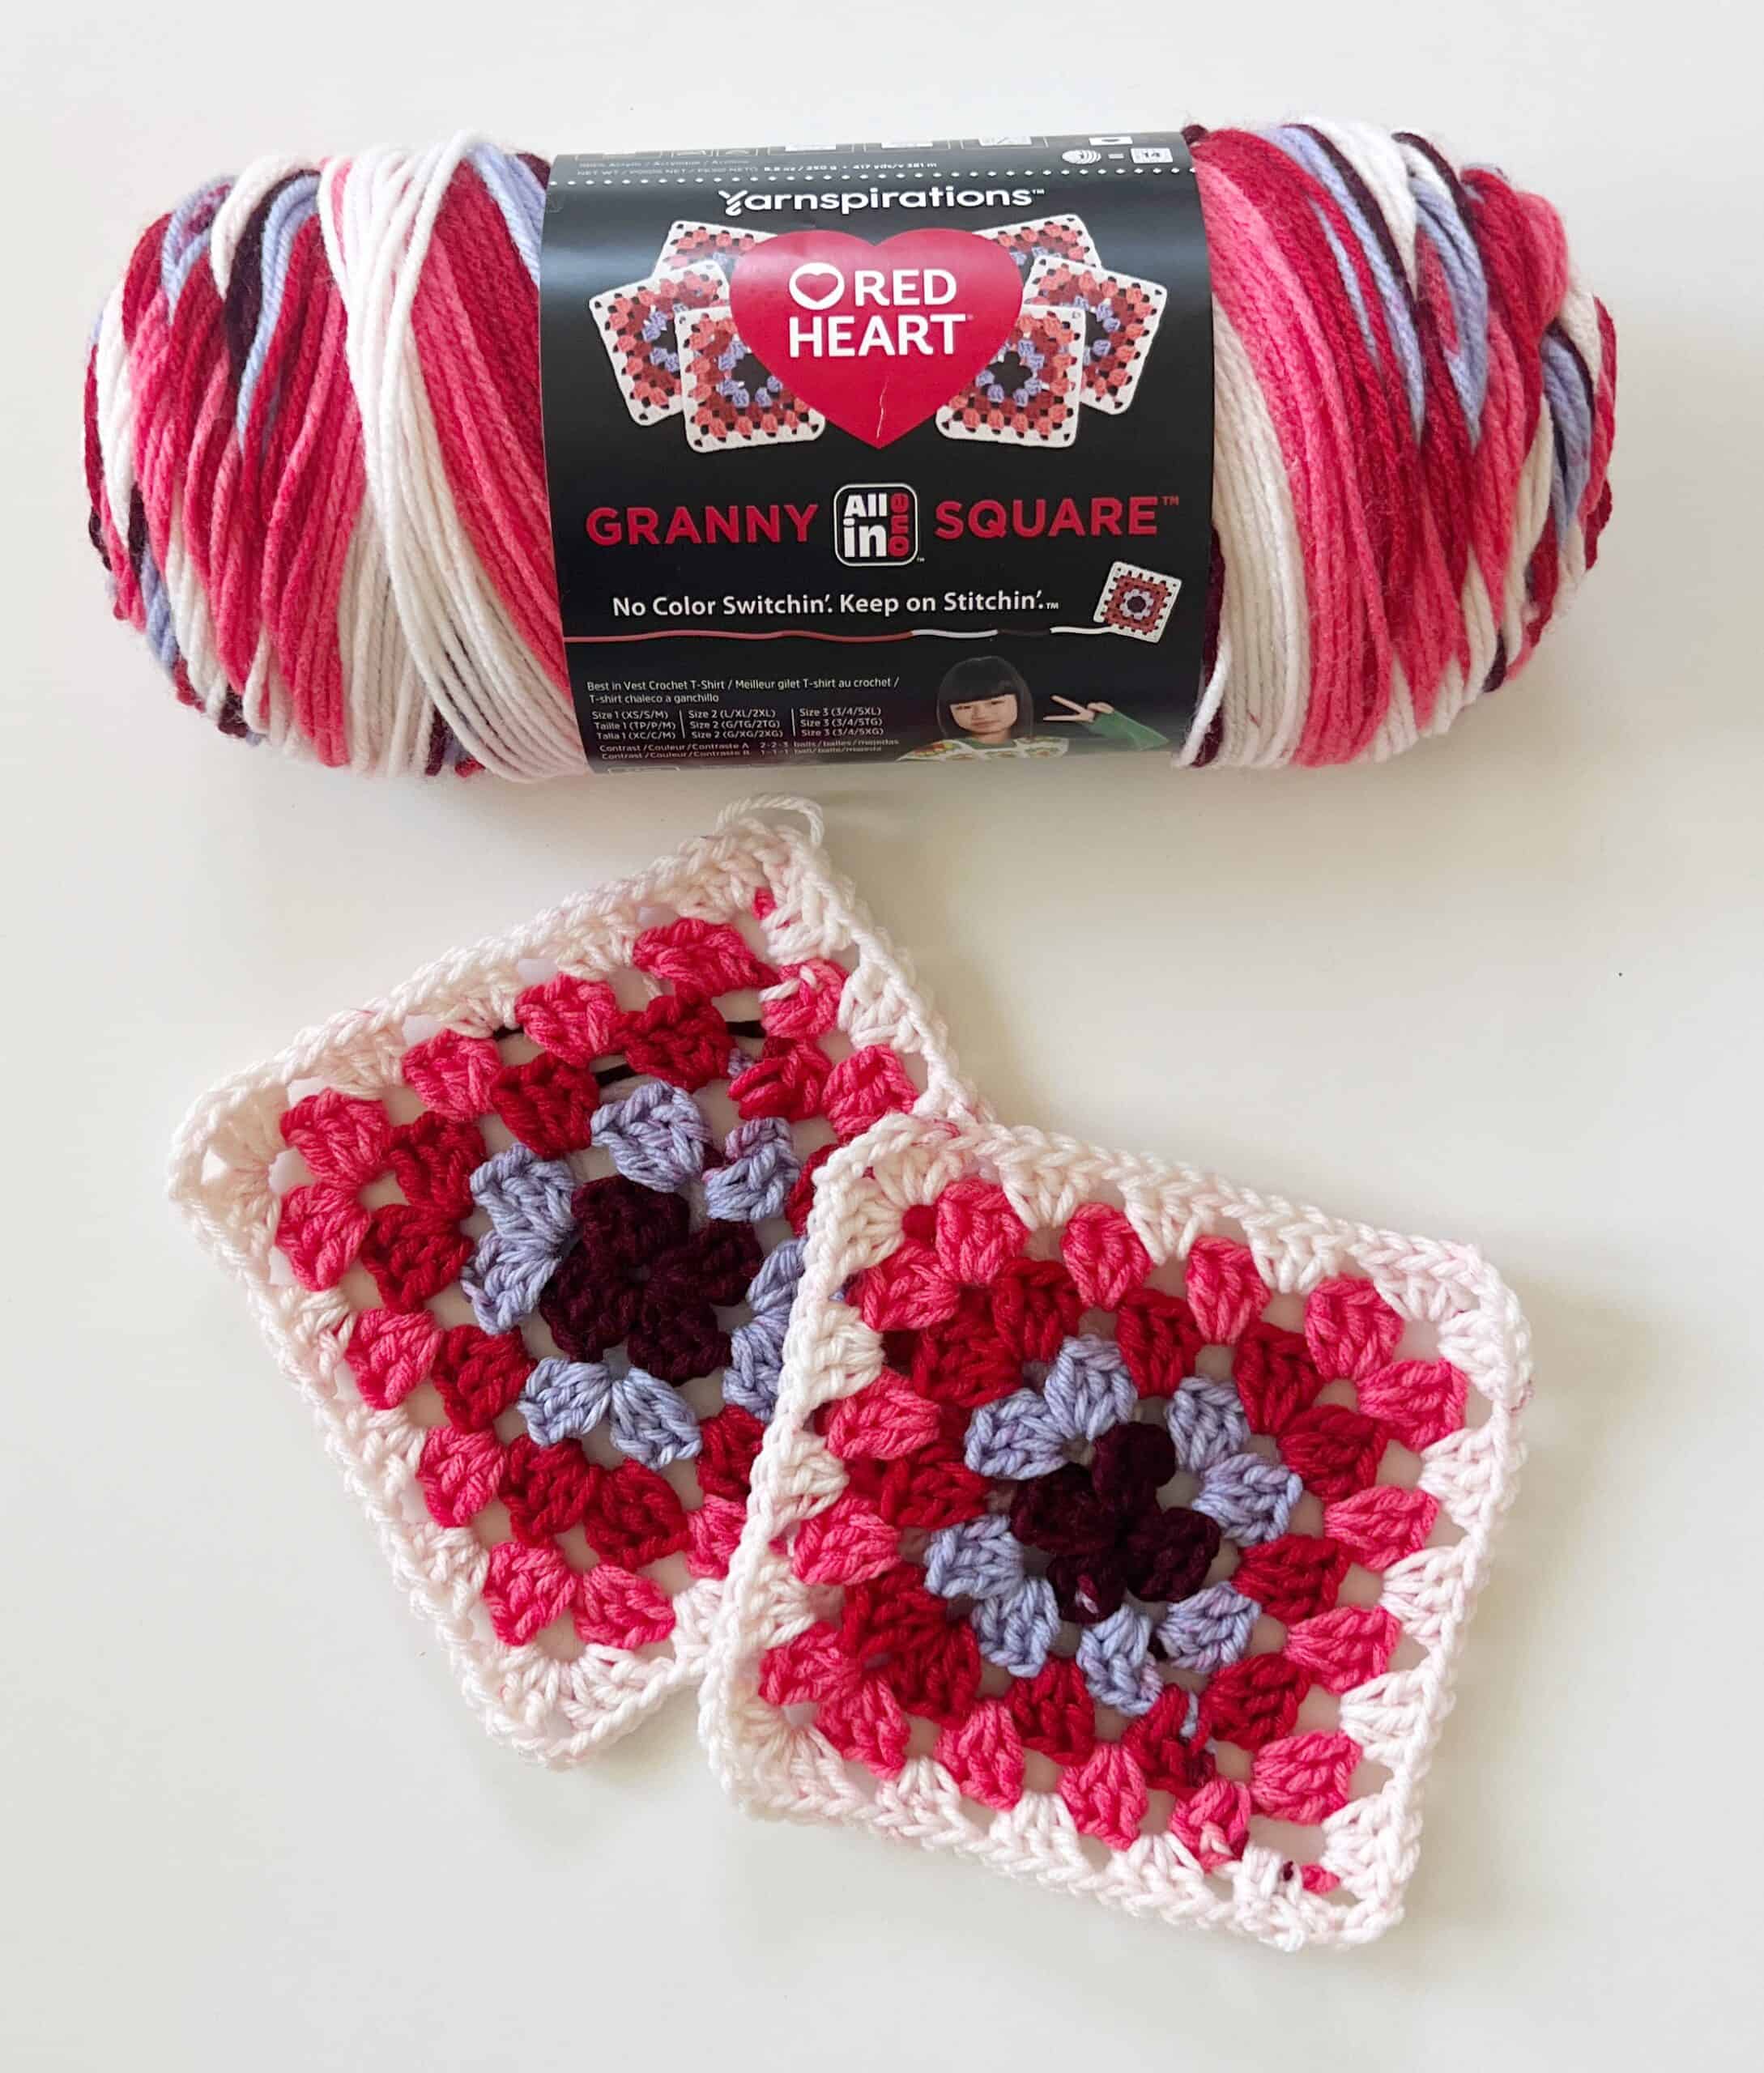 Red Heart Crochet Book J27 0031 Granny Squares Super Saver Yarn 12 Projects  on eBid Canada